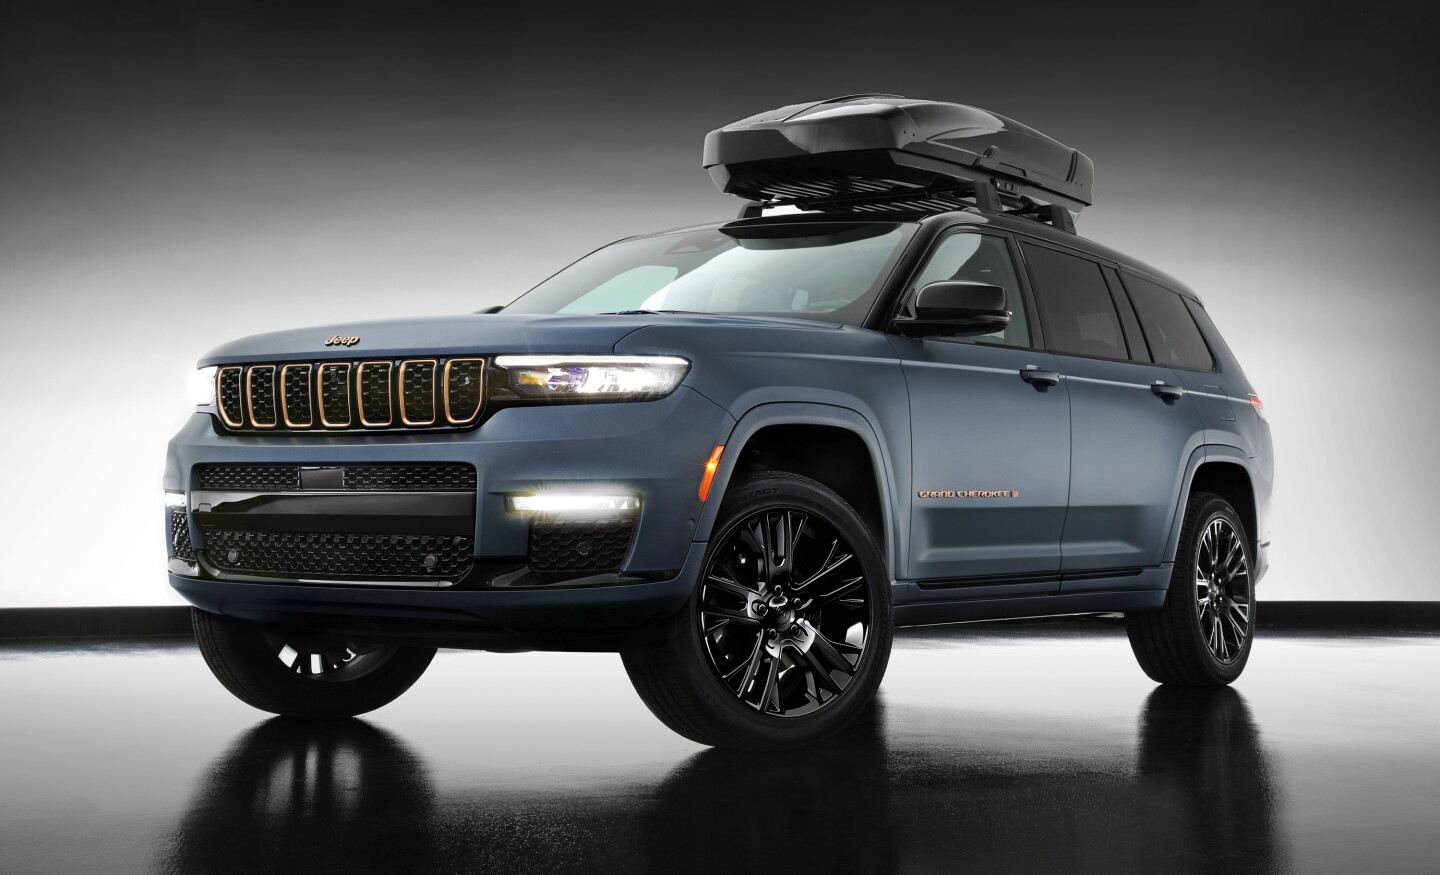 The Jeep Grand Cherokee L Breckenridge concept has a sweet, two-tone custom paint job and Thule cargo box